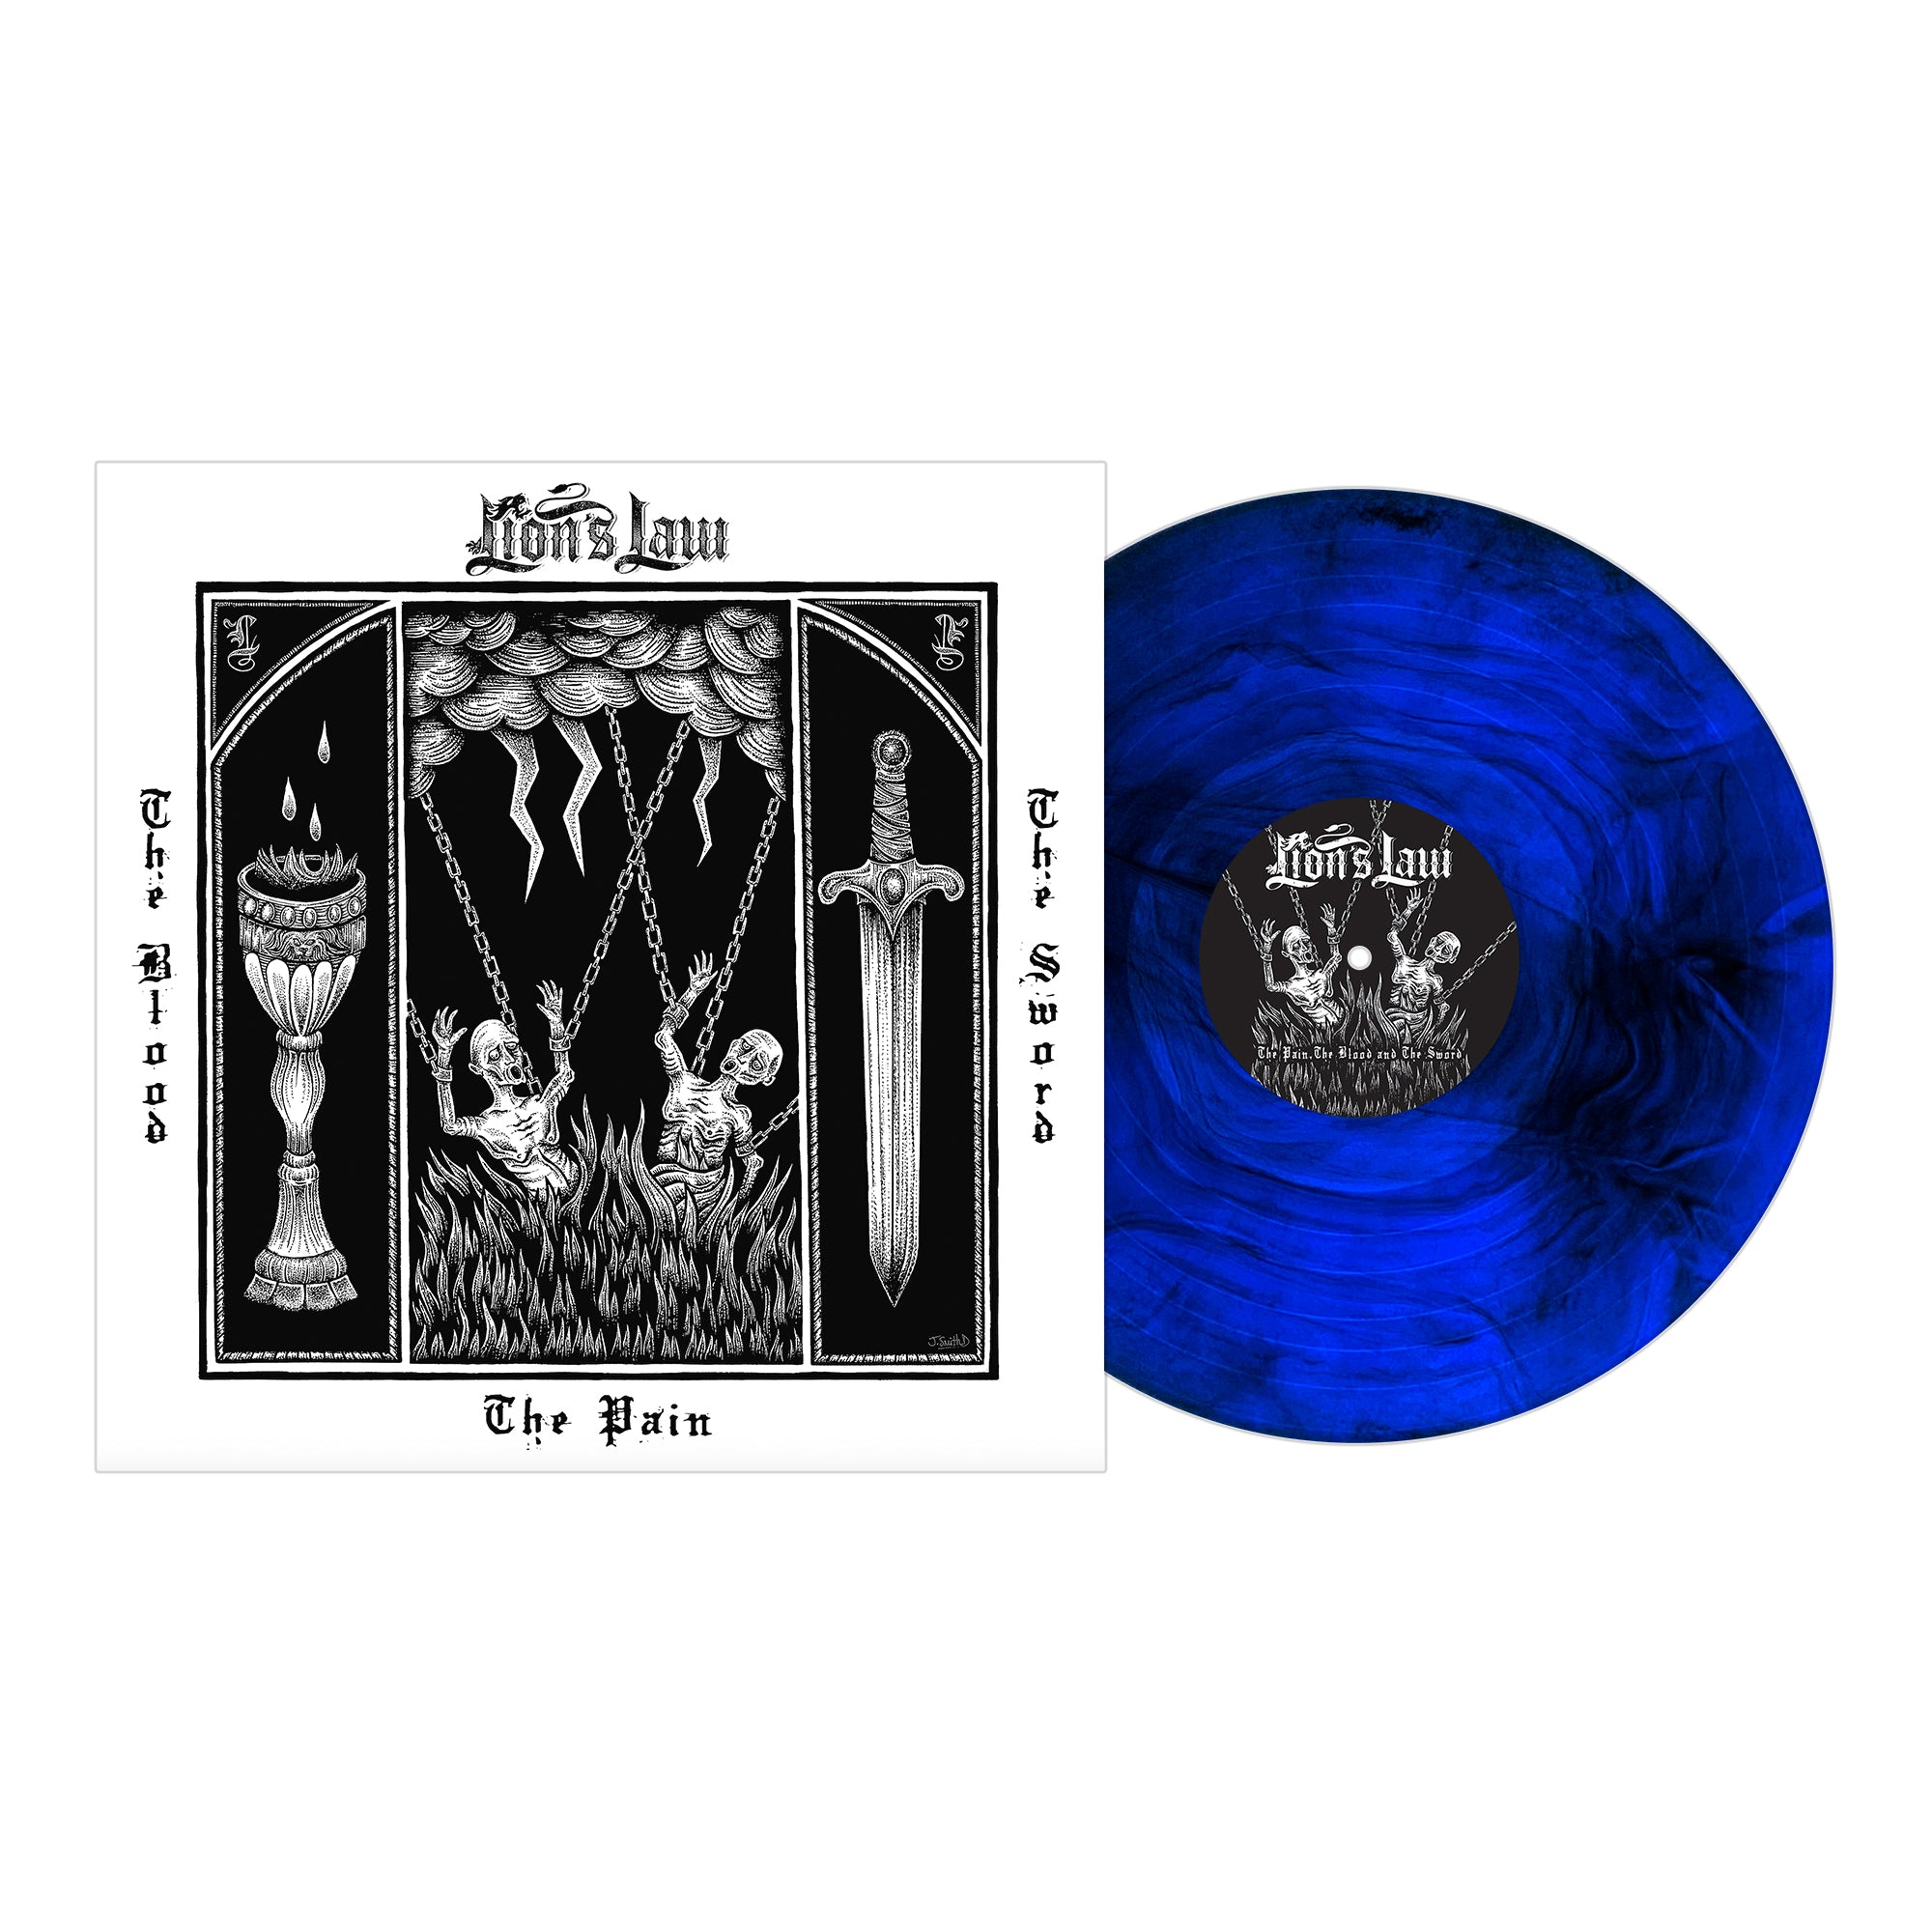 Lion's Law - The Pain, The Blood, and The Sword Blue & Black Galaxy Vinyl LP